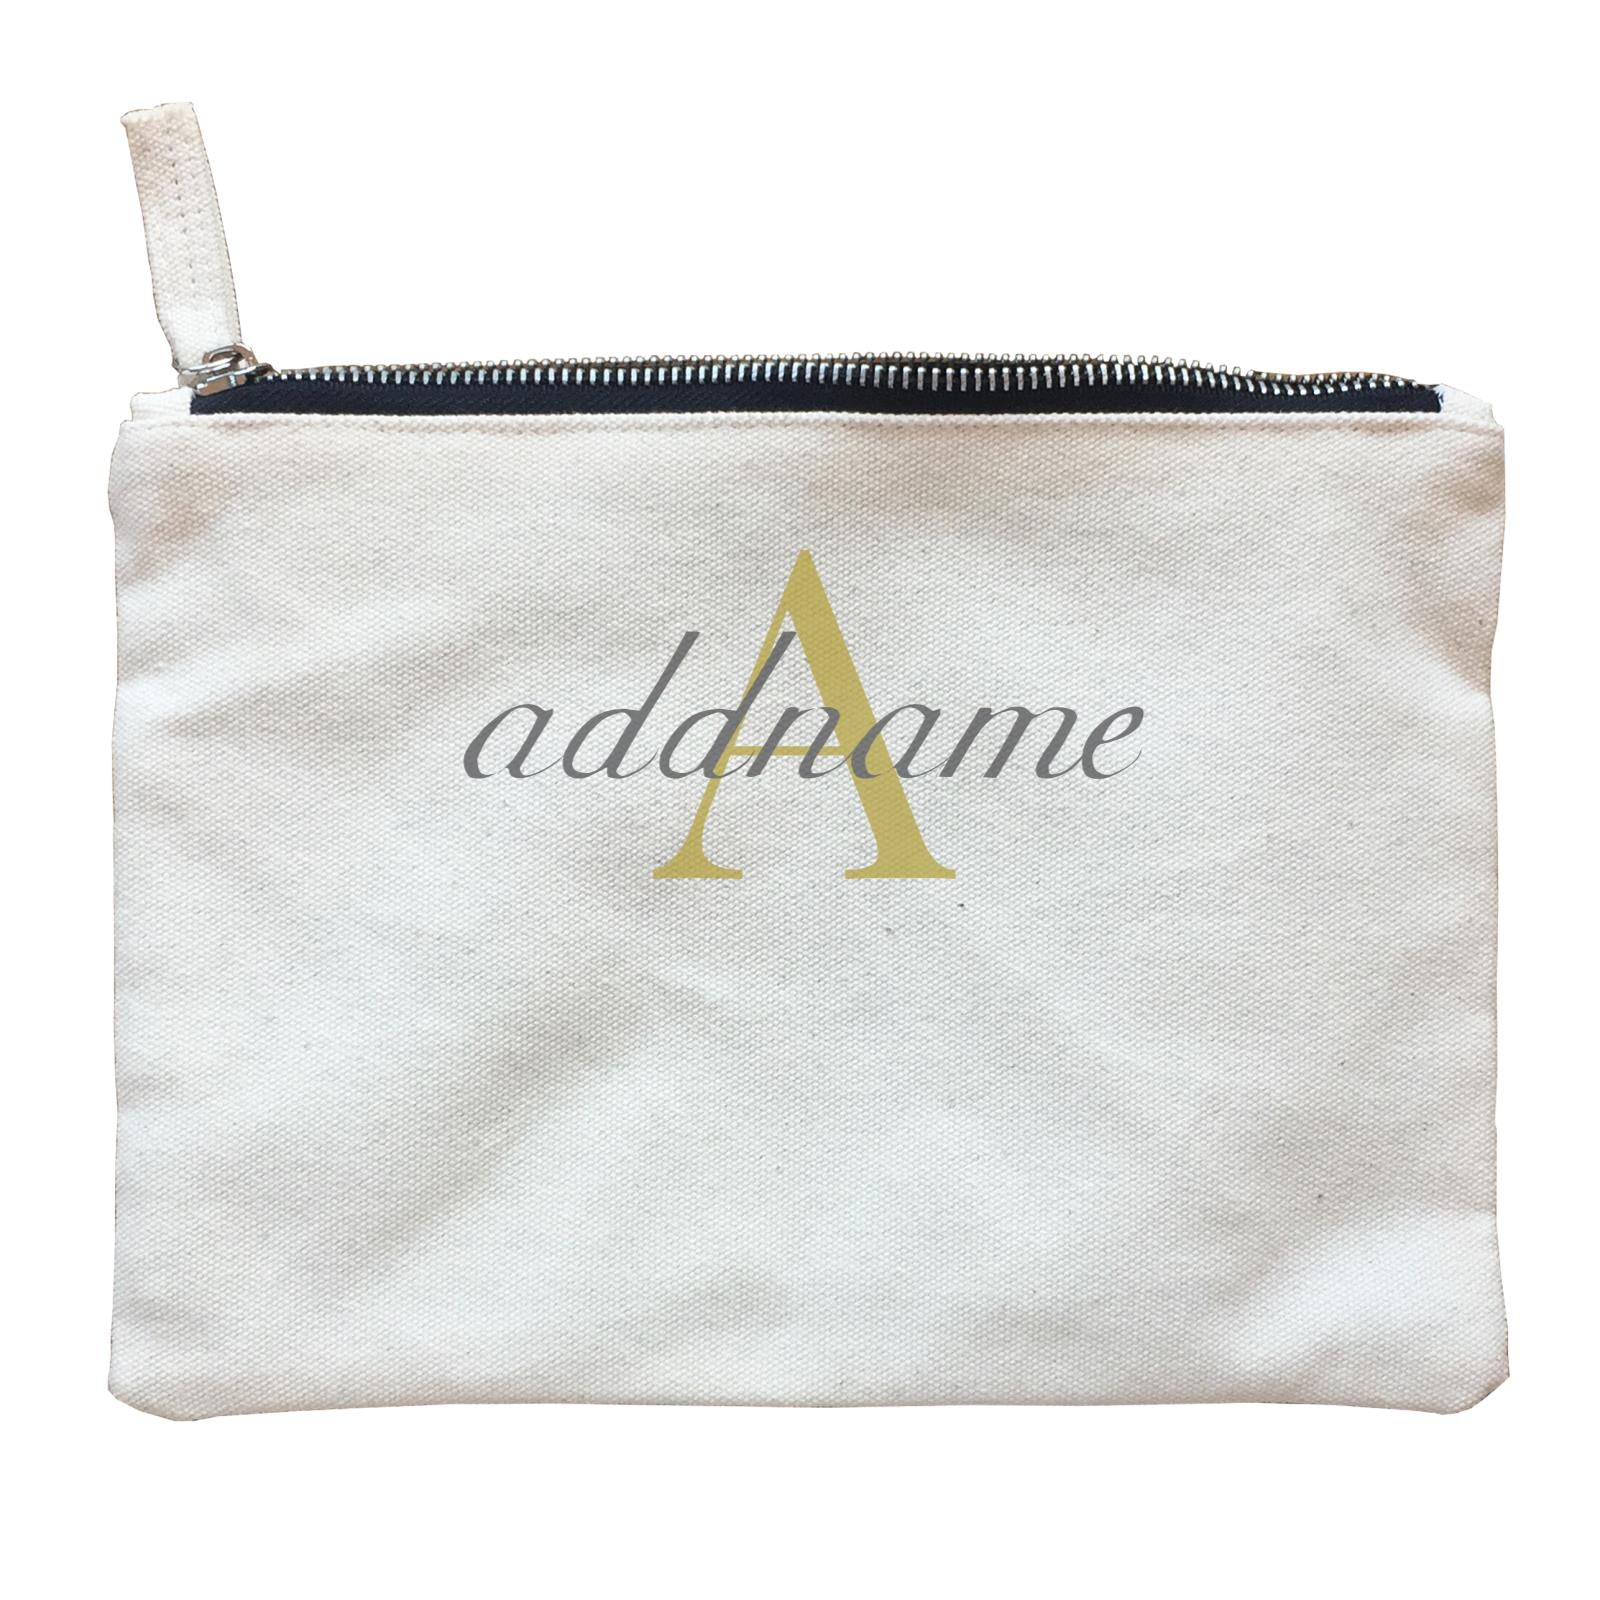 Modern Emblem with Add Initial and Addname Accessories Zipper Pouch